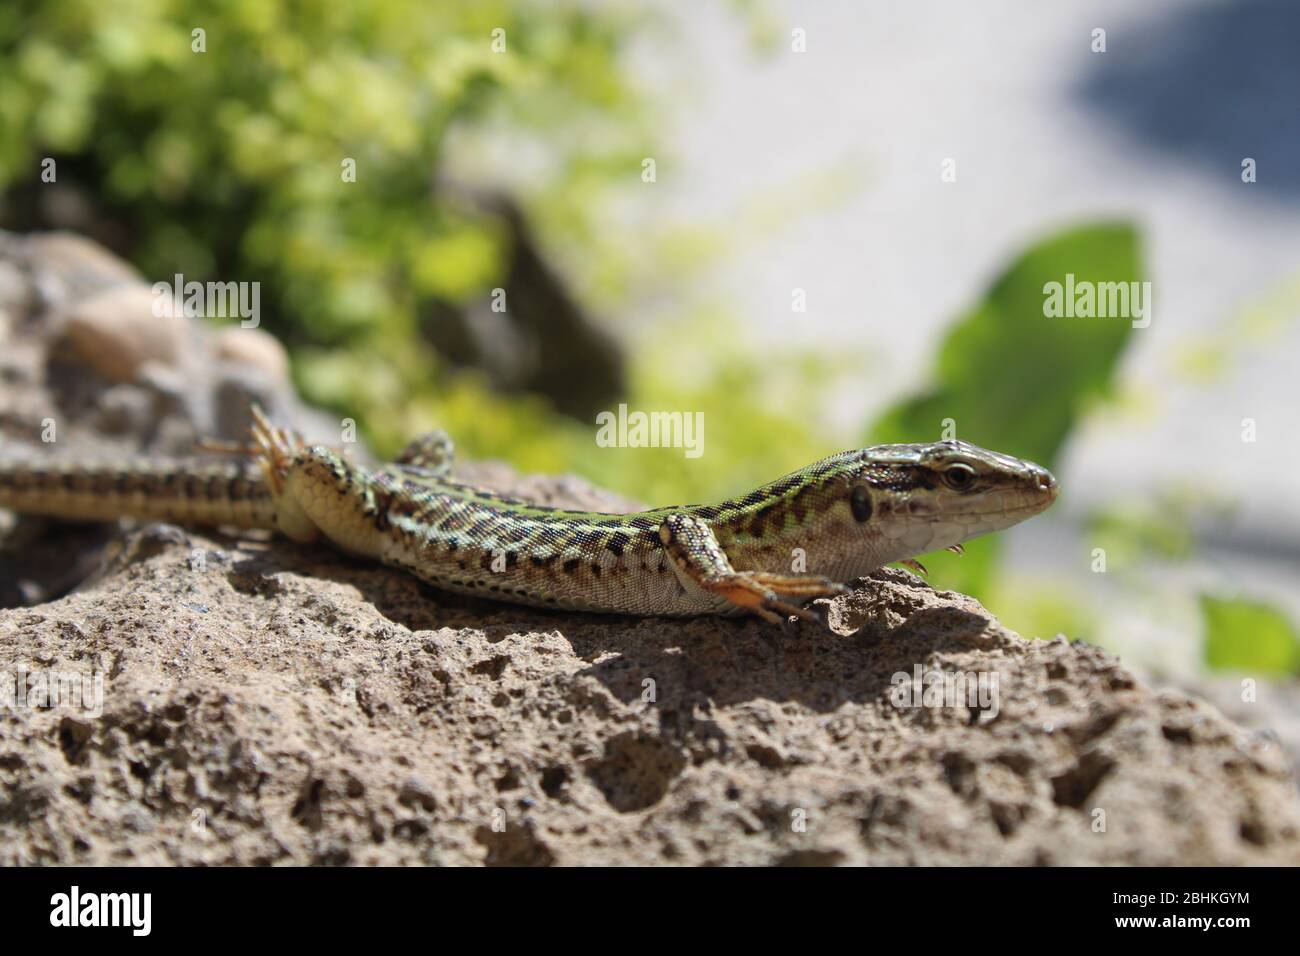 Lizard on volcanic rock, raising its feet to acknowledge the presence of a dominant being (the photographer) Stock Photo